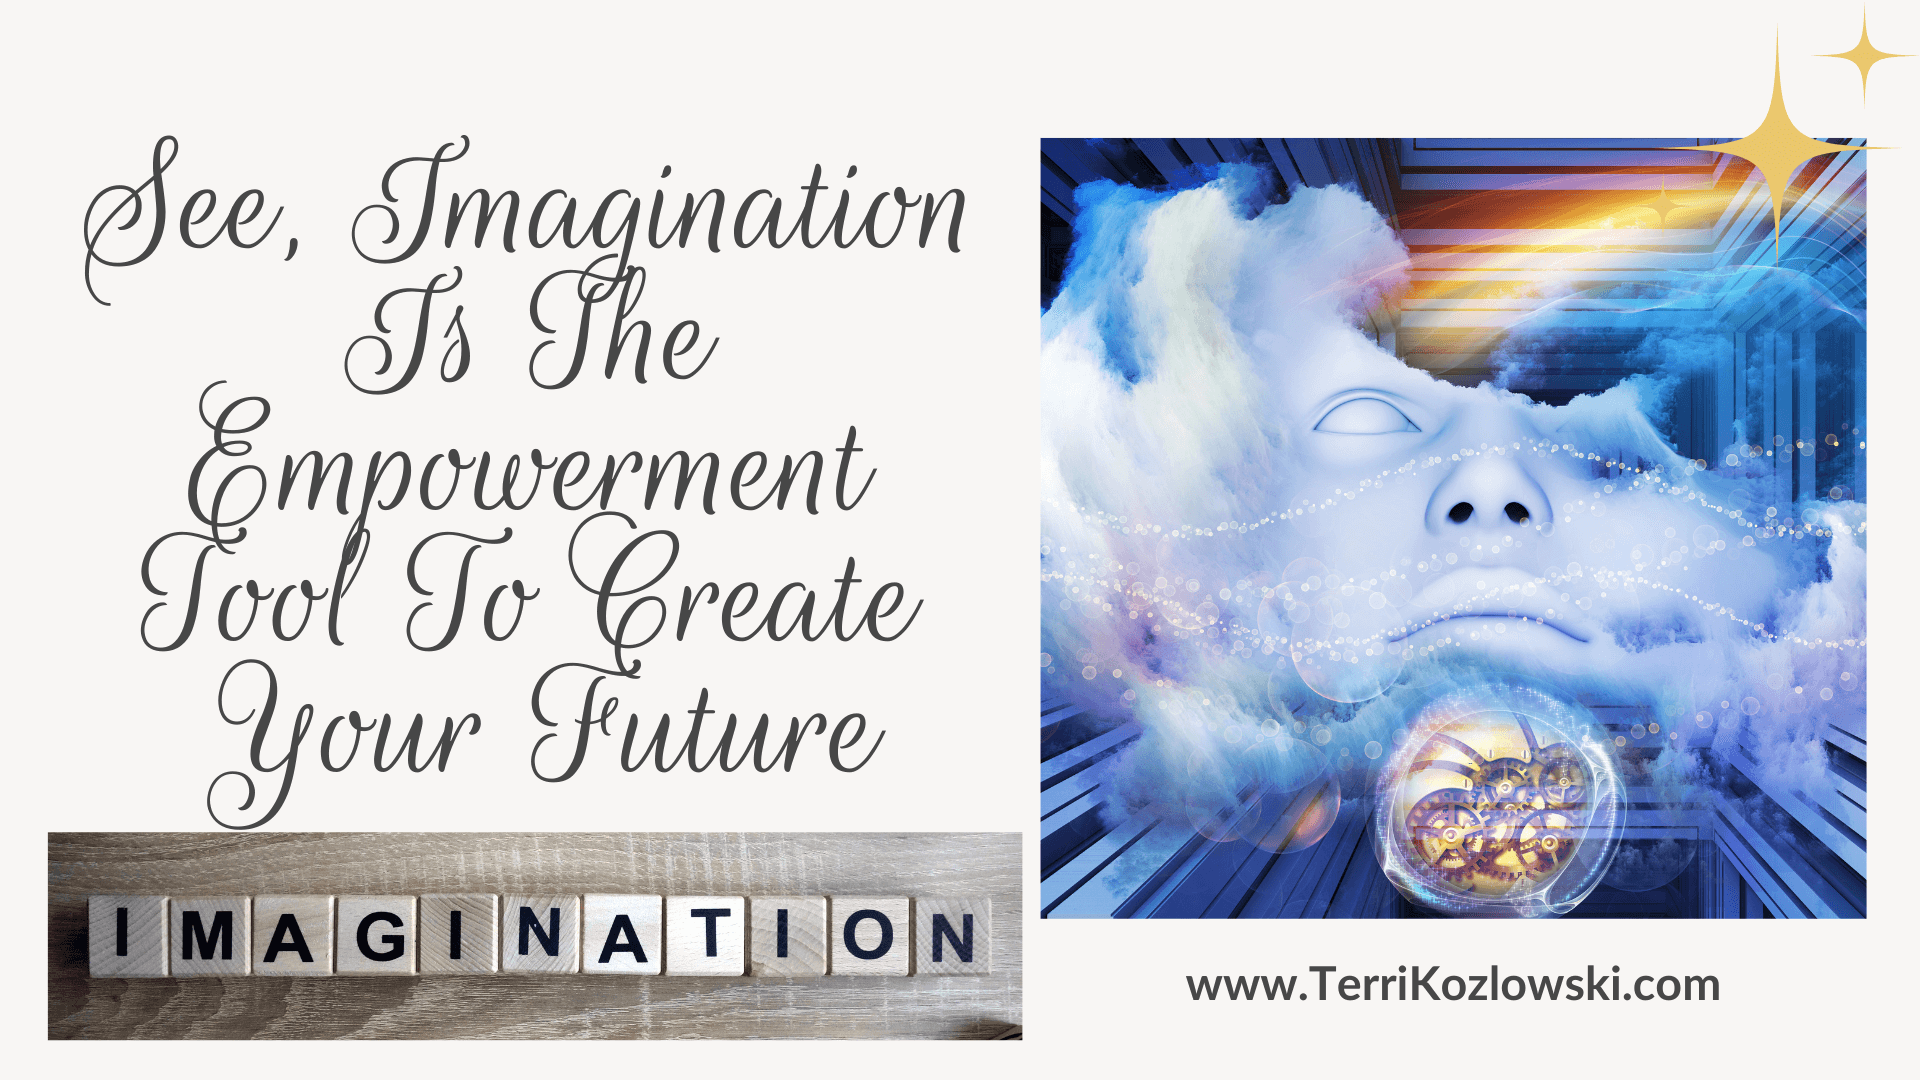 See, Imagination Is The Empowerment Tool To Create Your Future 